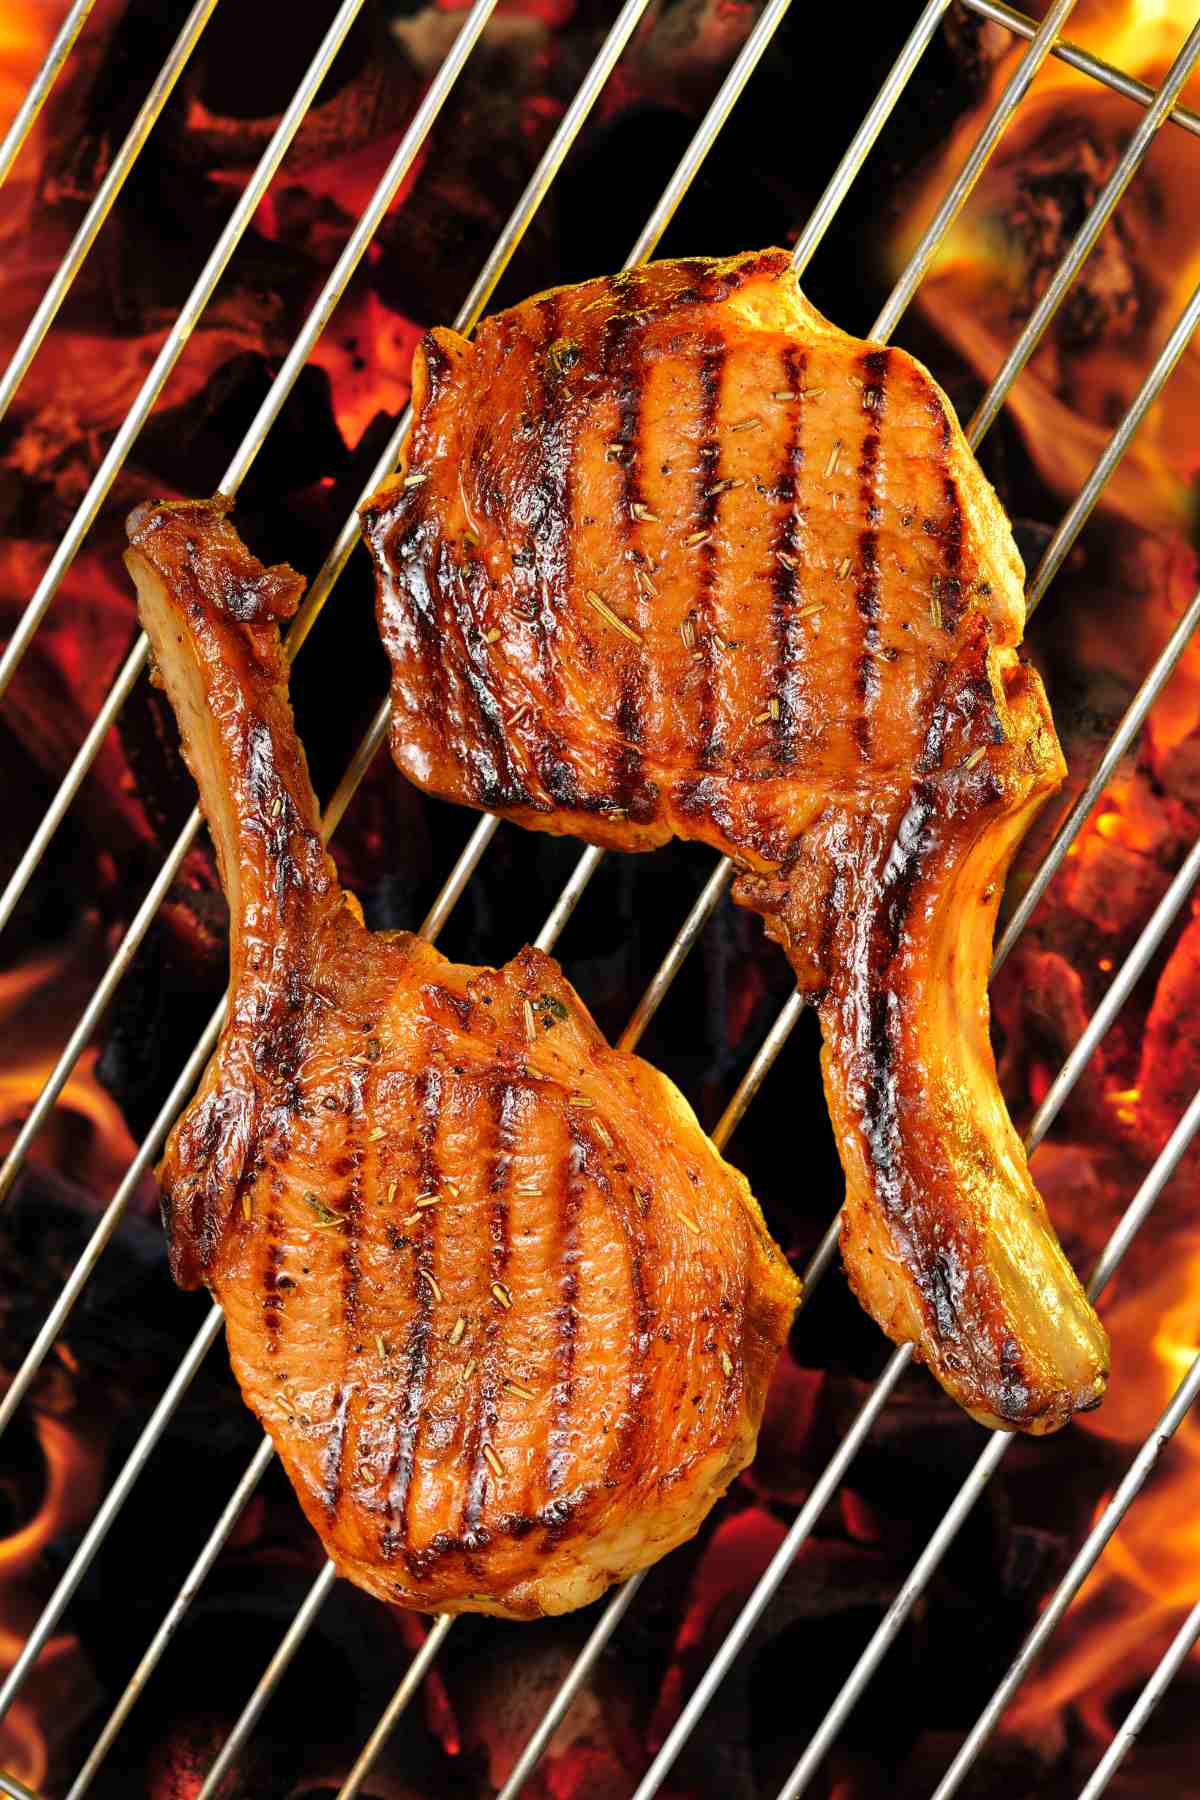 Nothing’s worse than rubbery, overcooked pork chops that lack flavor. Want to know the secret to tender, juicy grilled pork chops at home? You’ve got to pay attention to both the grill temperature and the internal temperature.